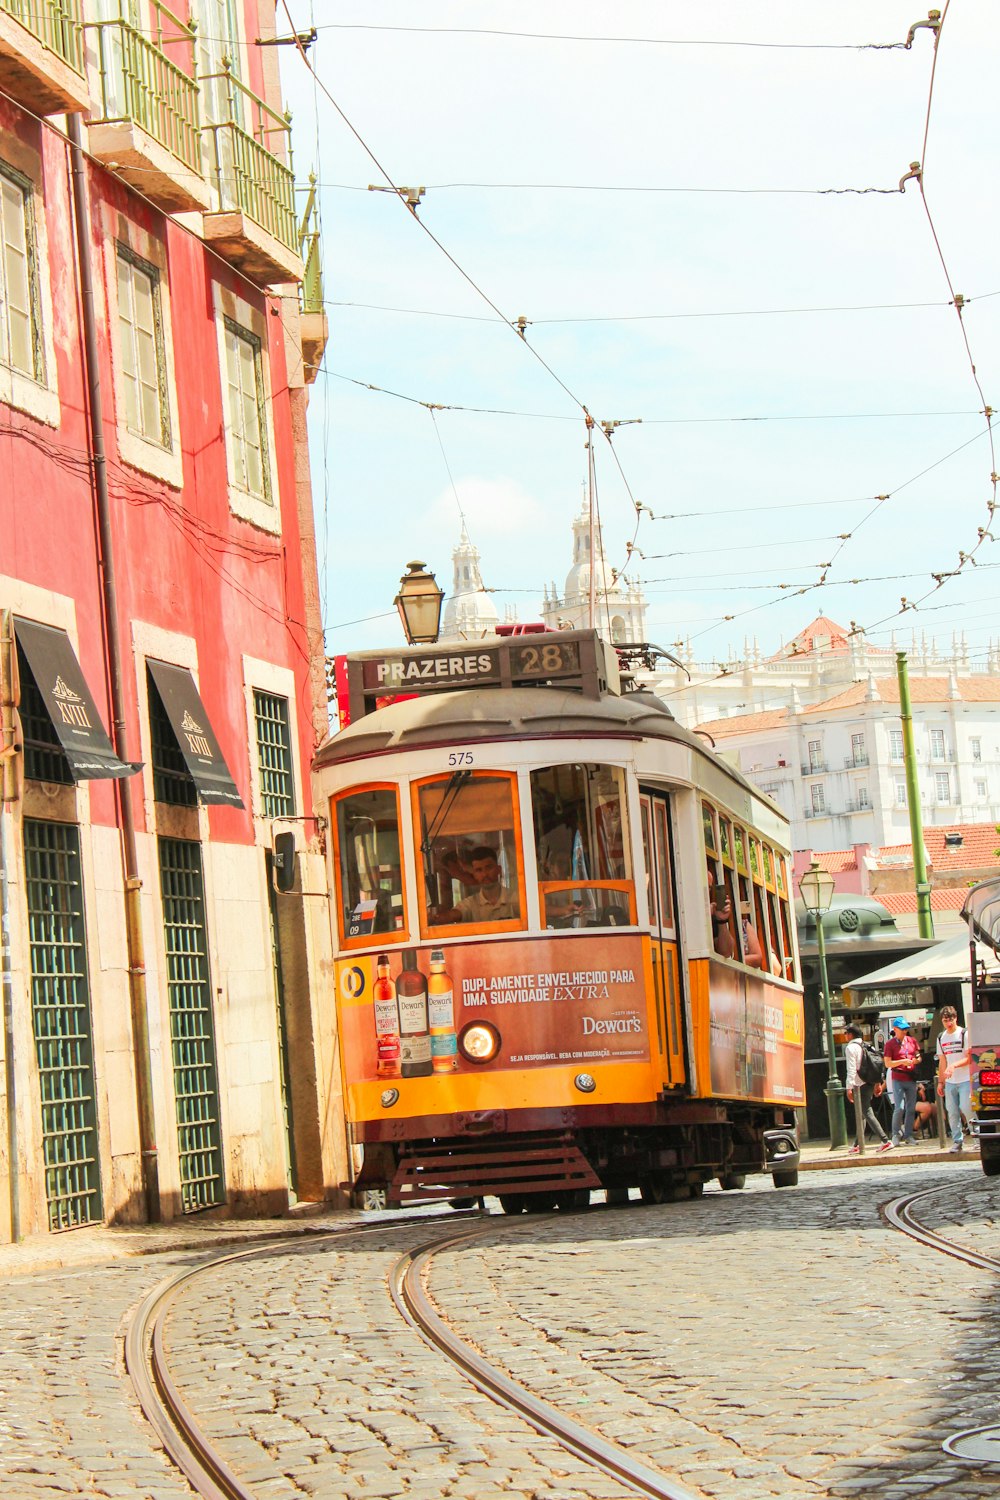 an orange trolley car traveling down a street next to a red building